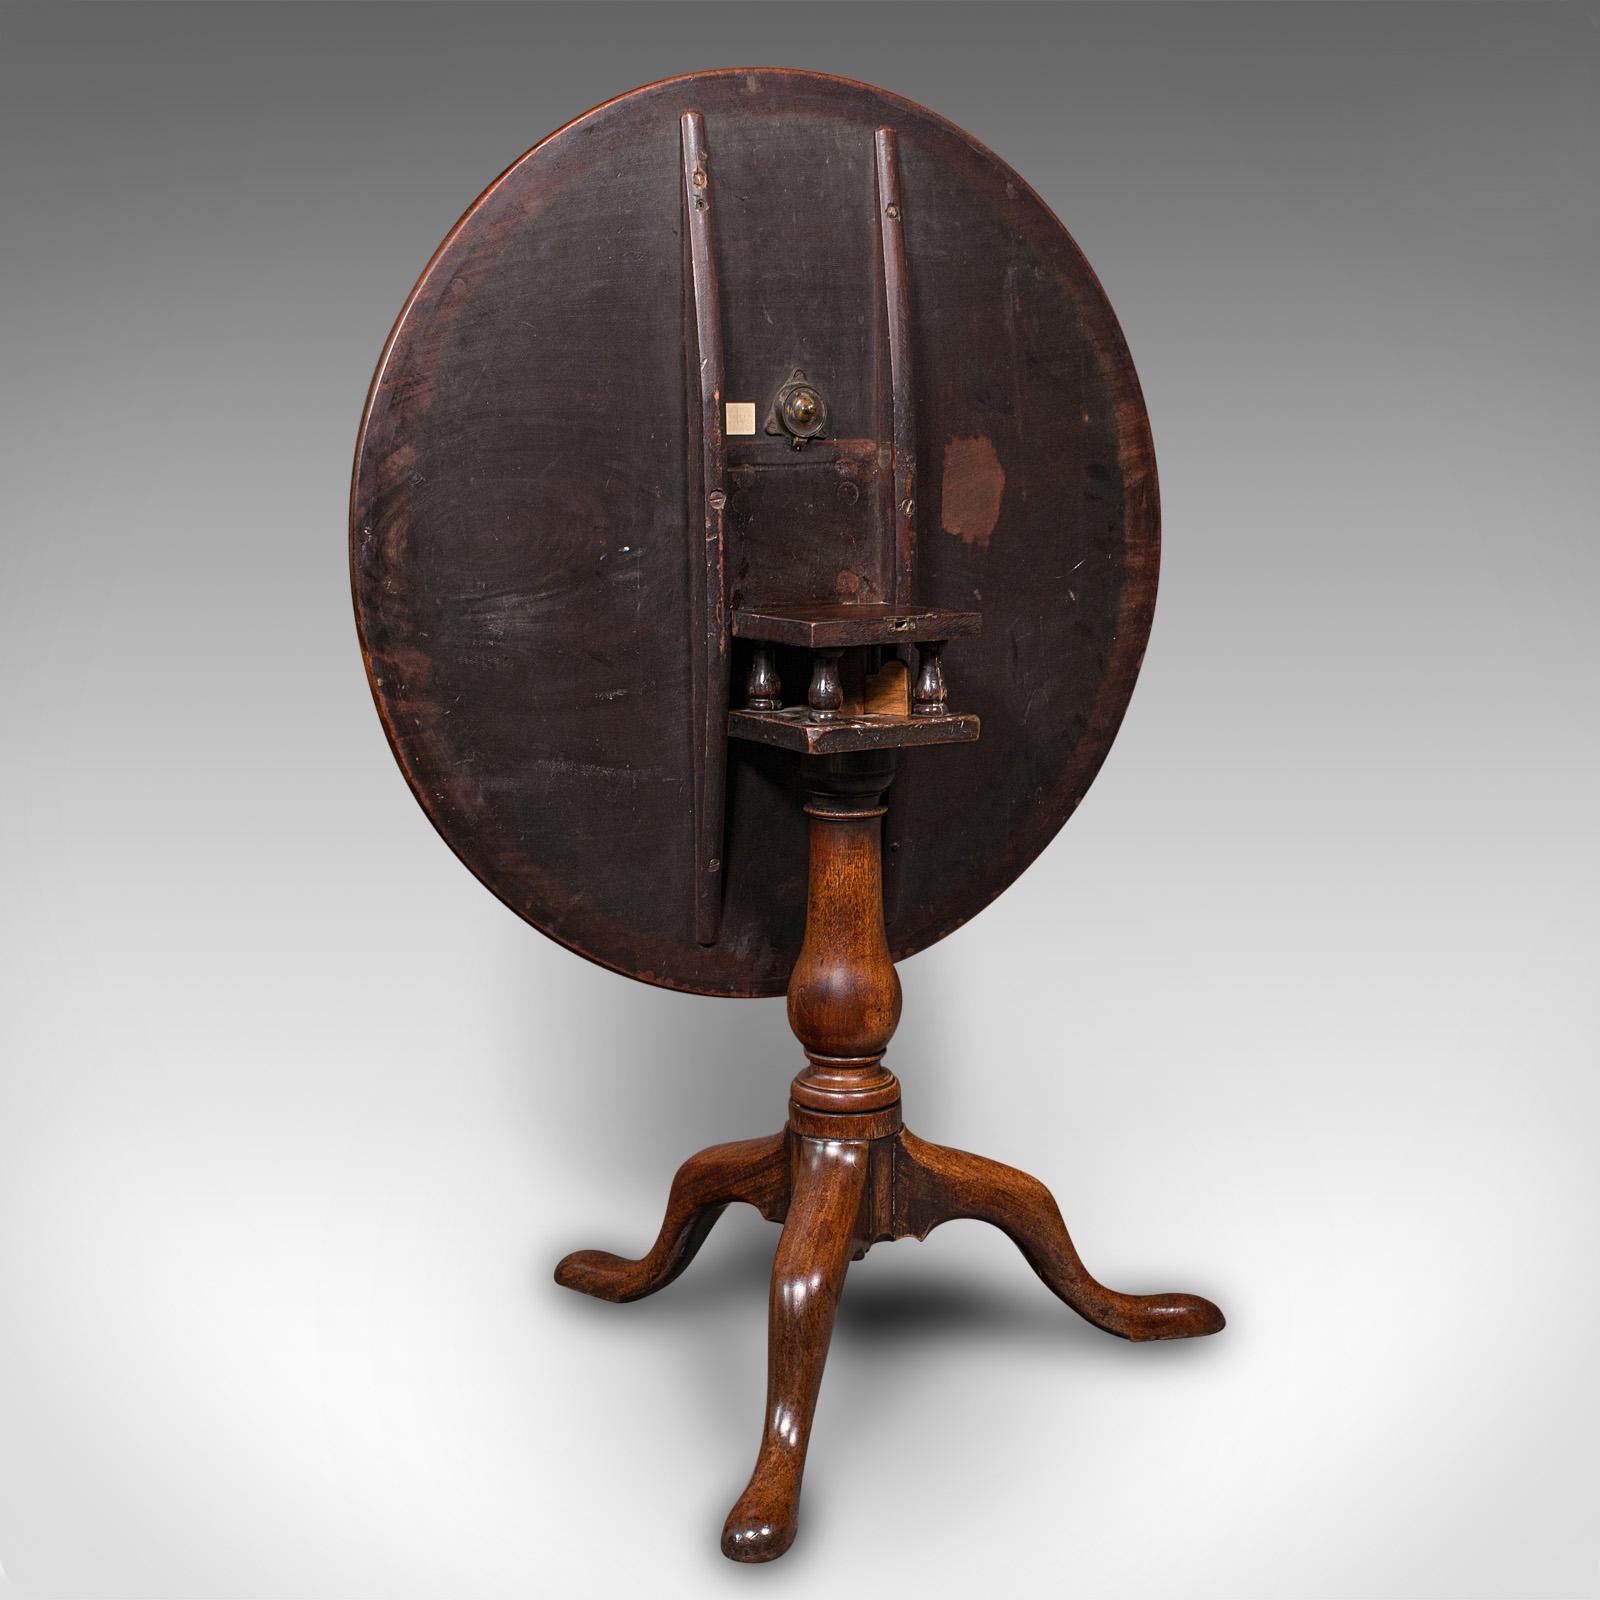 Antique Tilt Top Table, English, Mahogany, Side, Lamp, Rotary, Georgian, C.1760 For Sale 1